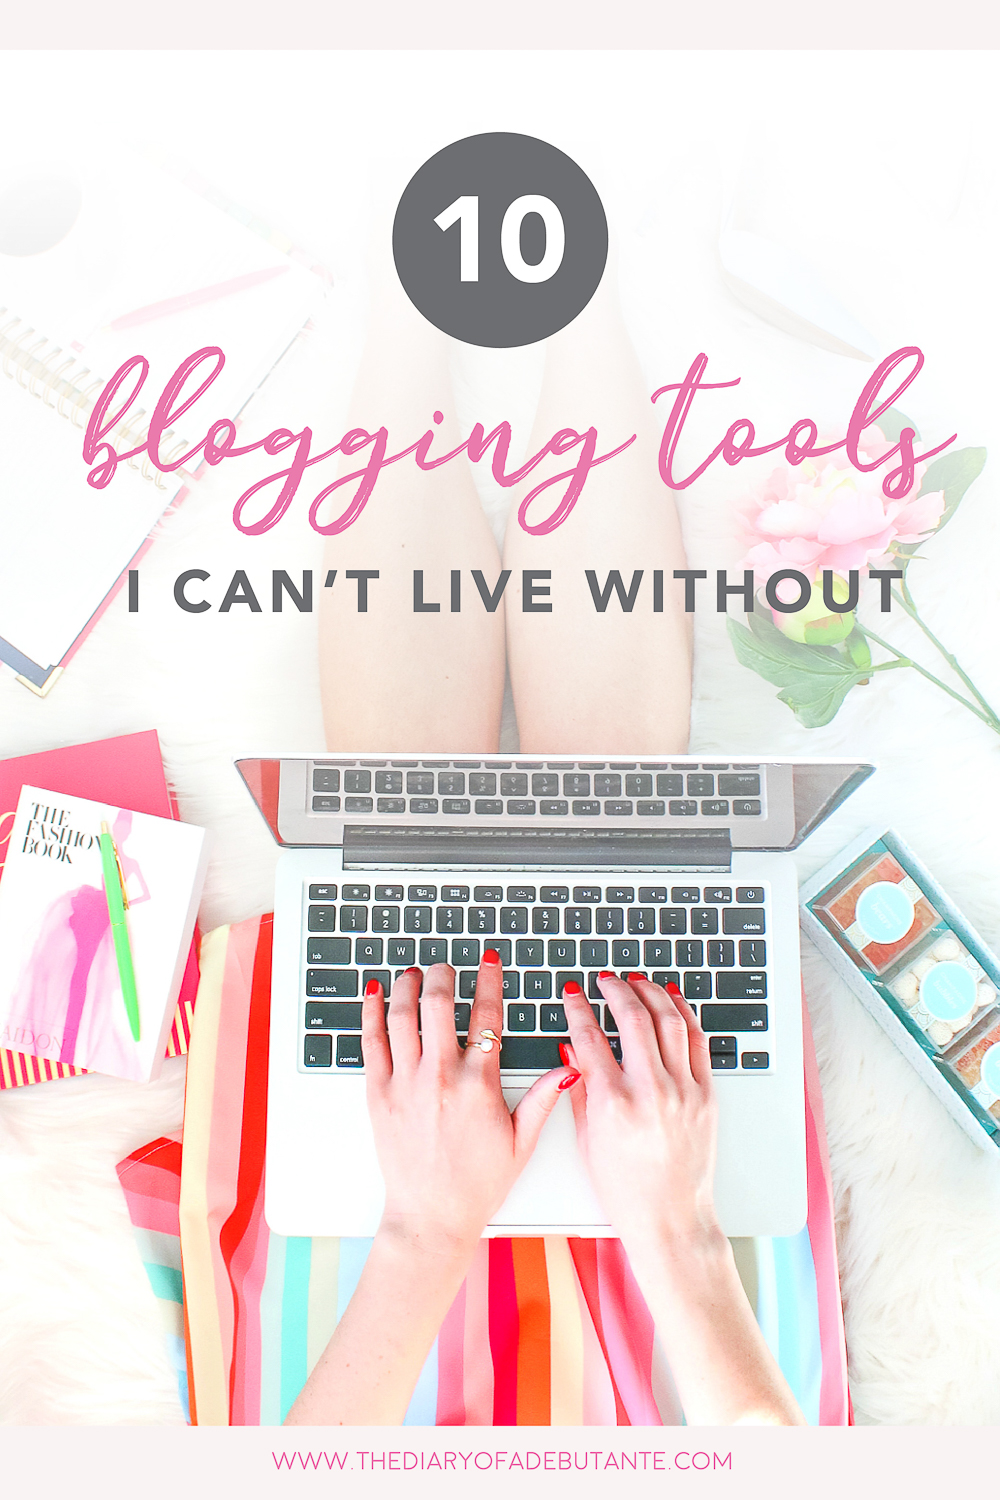 Best Blogging Tools and Best Social Media Management Tools for Bloggers and Small Businesses by popular affordable fashion and southern lifestyle blogger Stephanie Ziajka from Diary of a Debutante, best social media marketing tools, best blogging resources